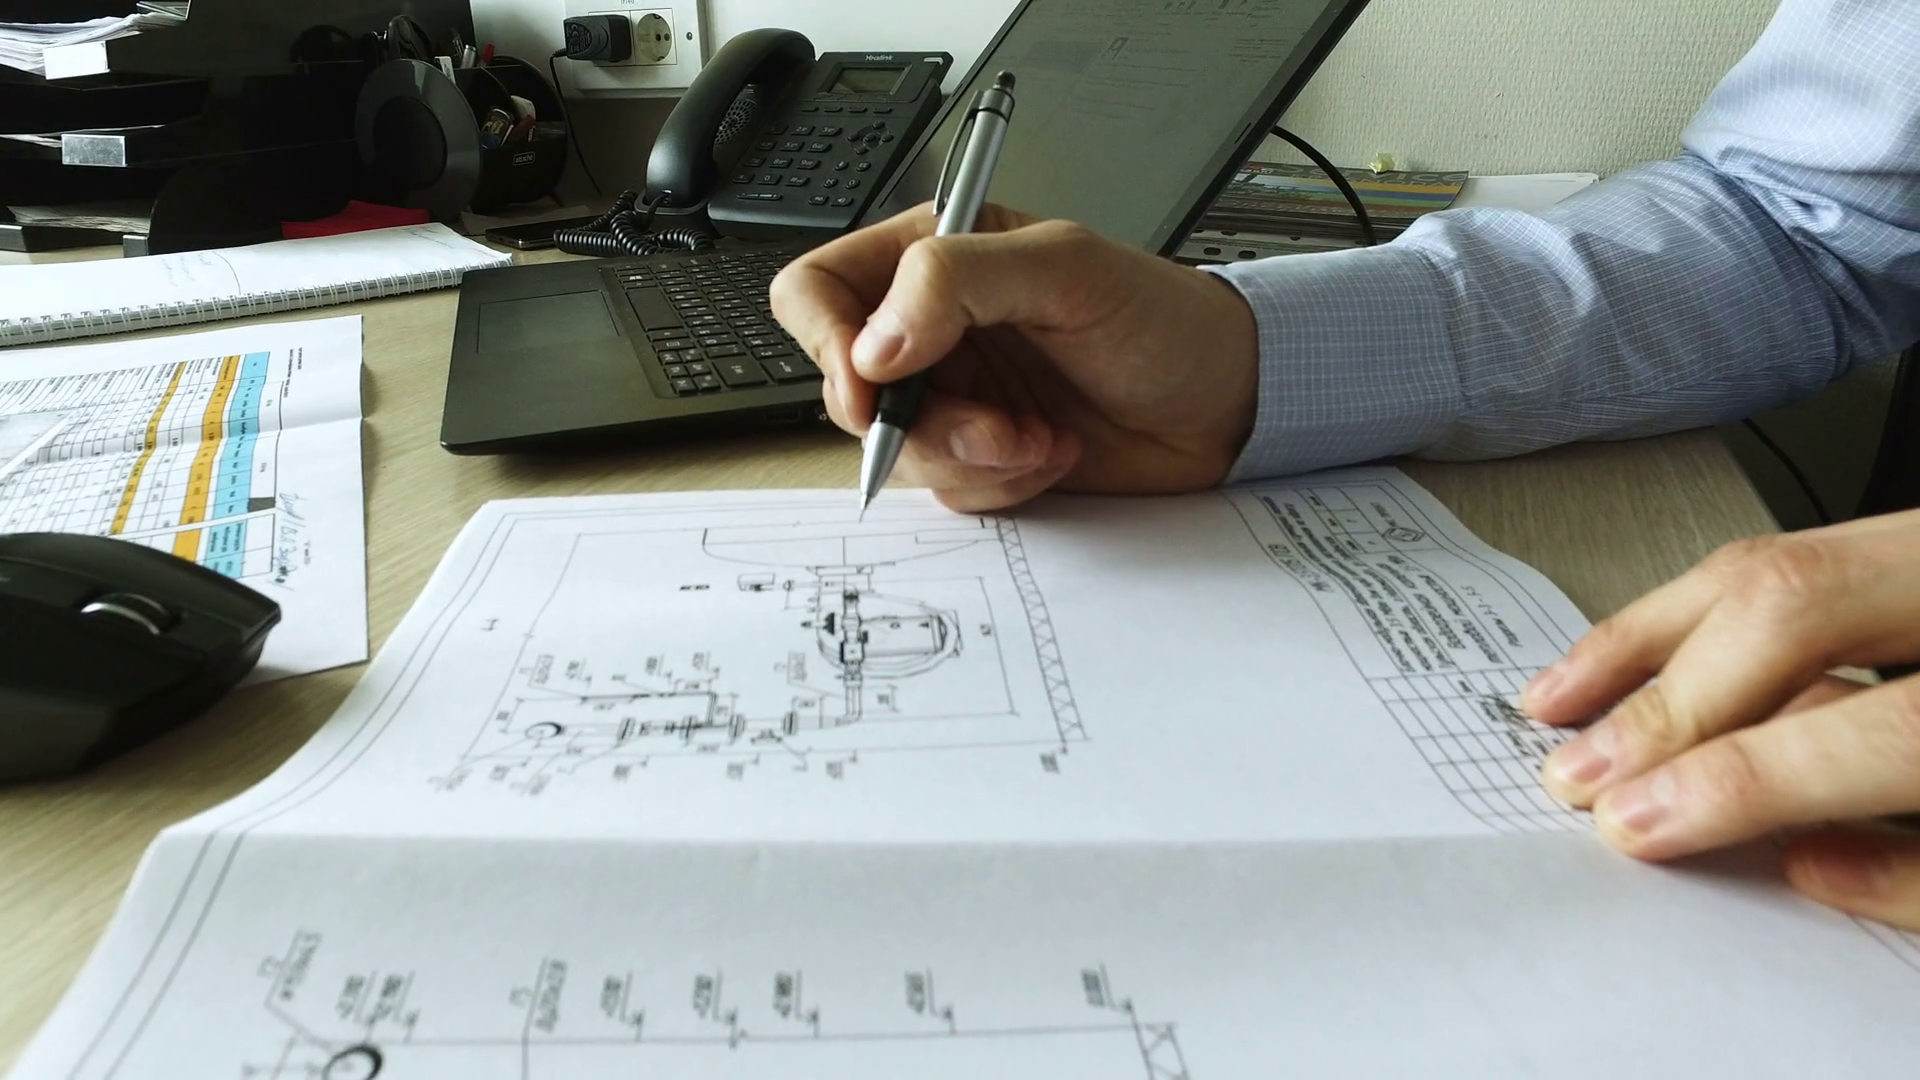 engineering-technical-worker-engineer-studying-the-drawings-of-an-equipment-4k_sszkcumwox_thumbnail-full01.png